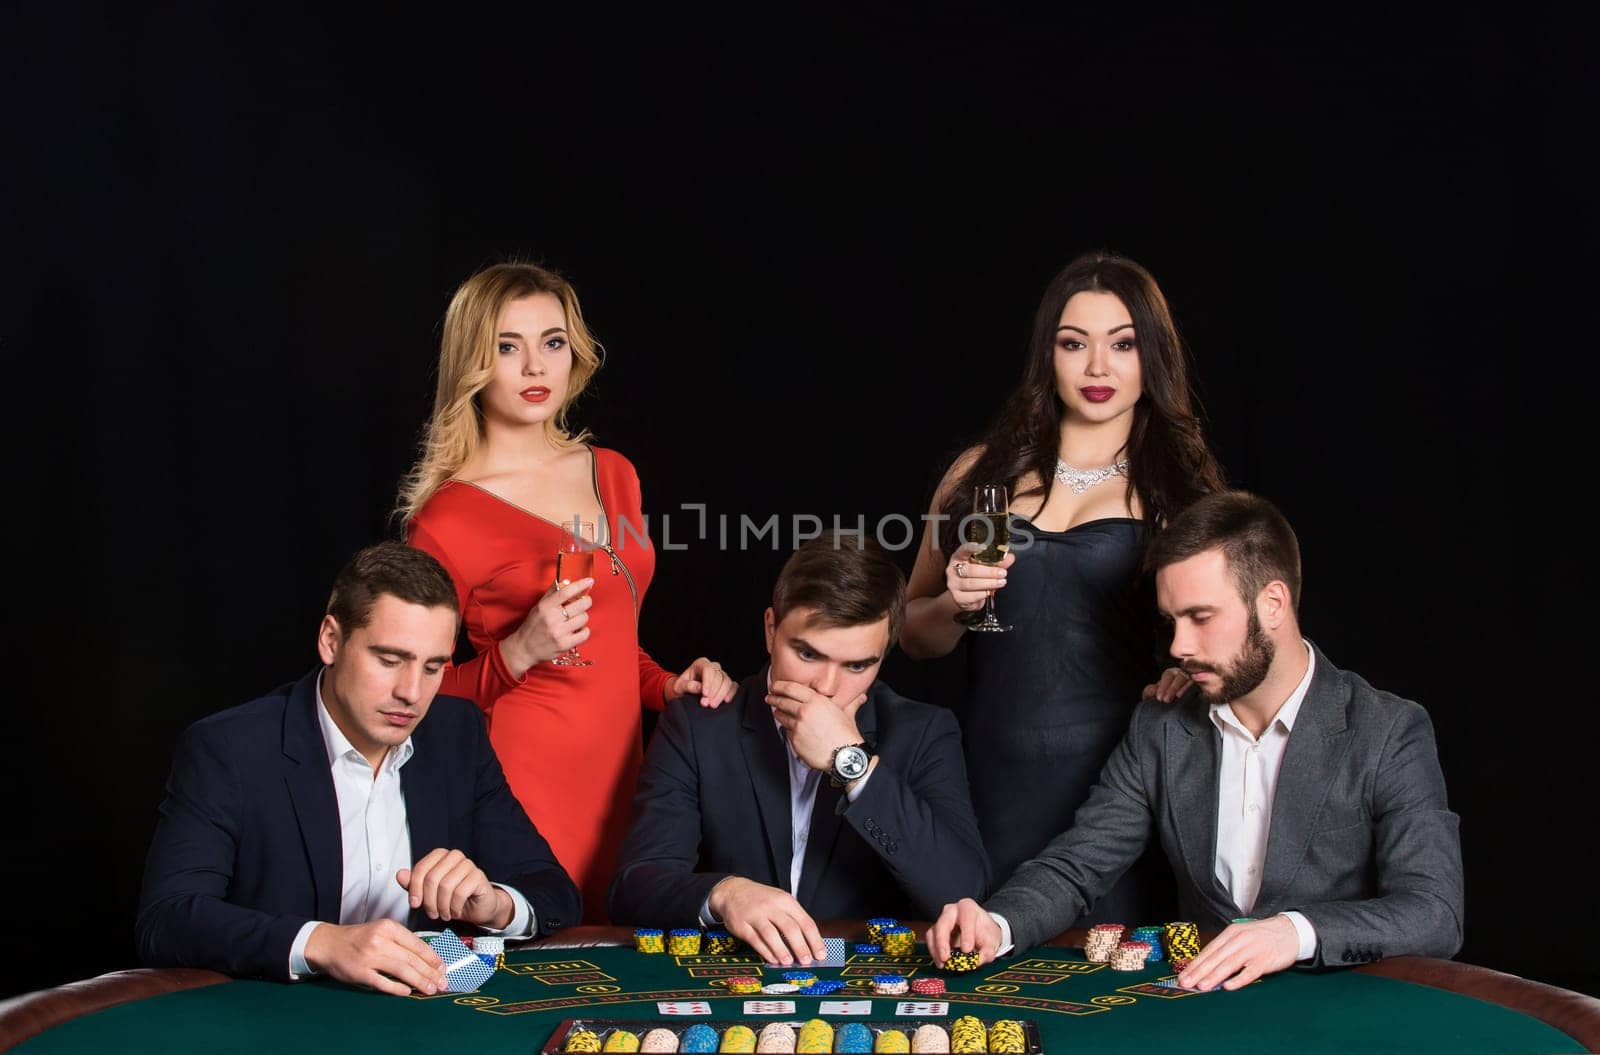 People at the poker table in casino. Men in suits, the women in beautiful dresses. Vacation with friends